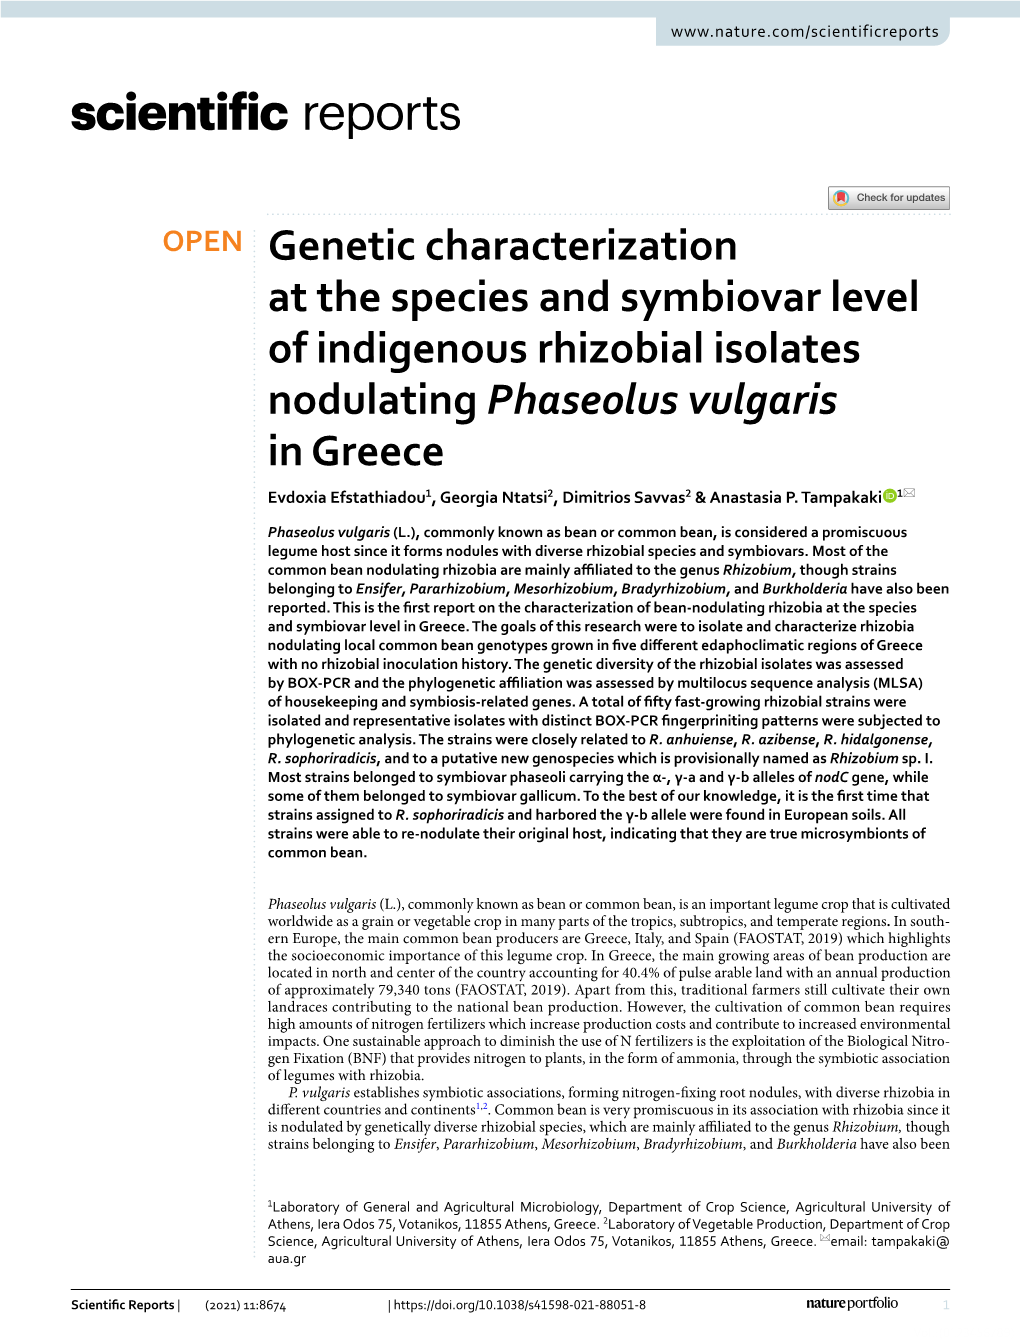 Genetic Characterization at the Species and Symbiovar Level of Indigenous Rhizobial Isolates Nodulating Phaseolus Vulgaris in Gr